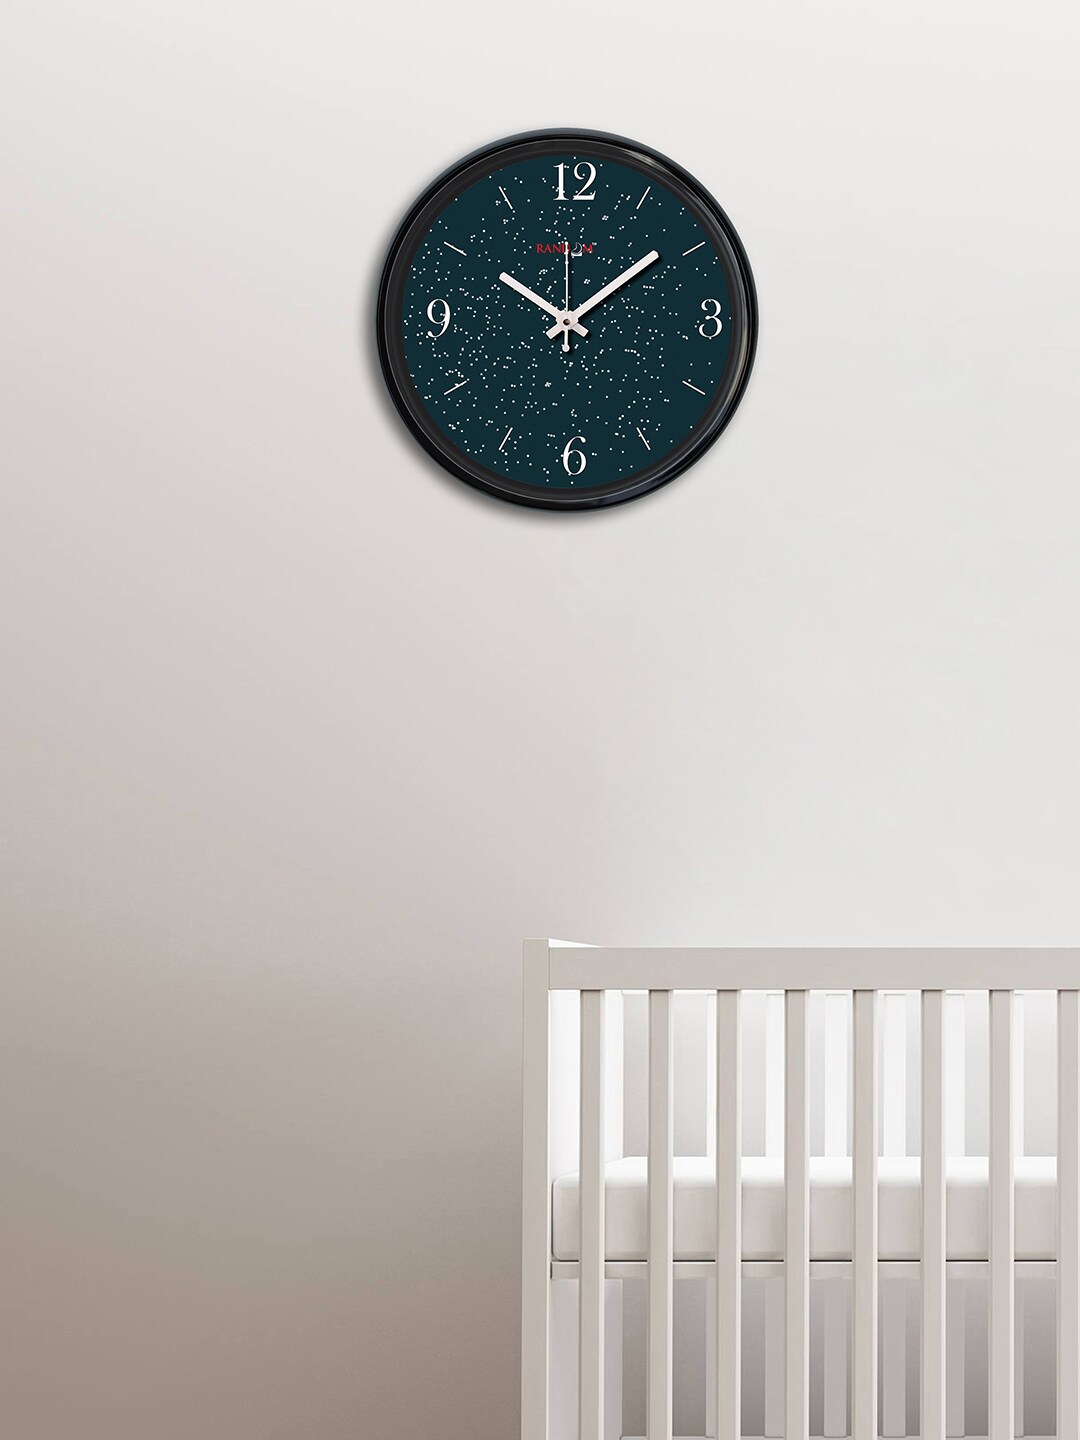 RANDOM Teal Round Printed Analogue Wall Clock Price in India